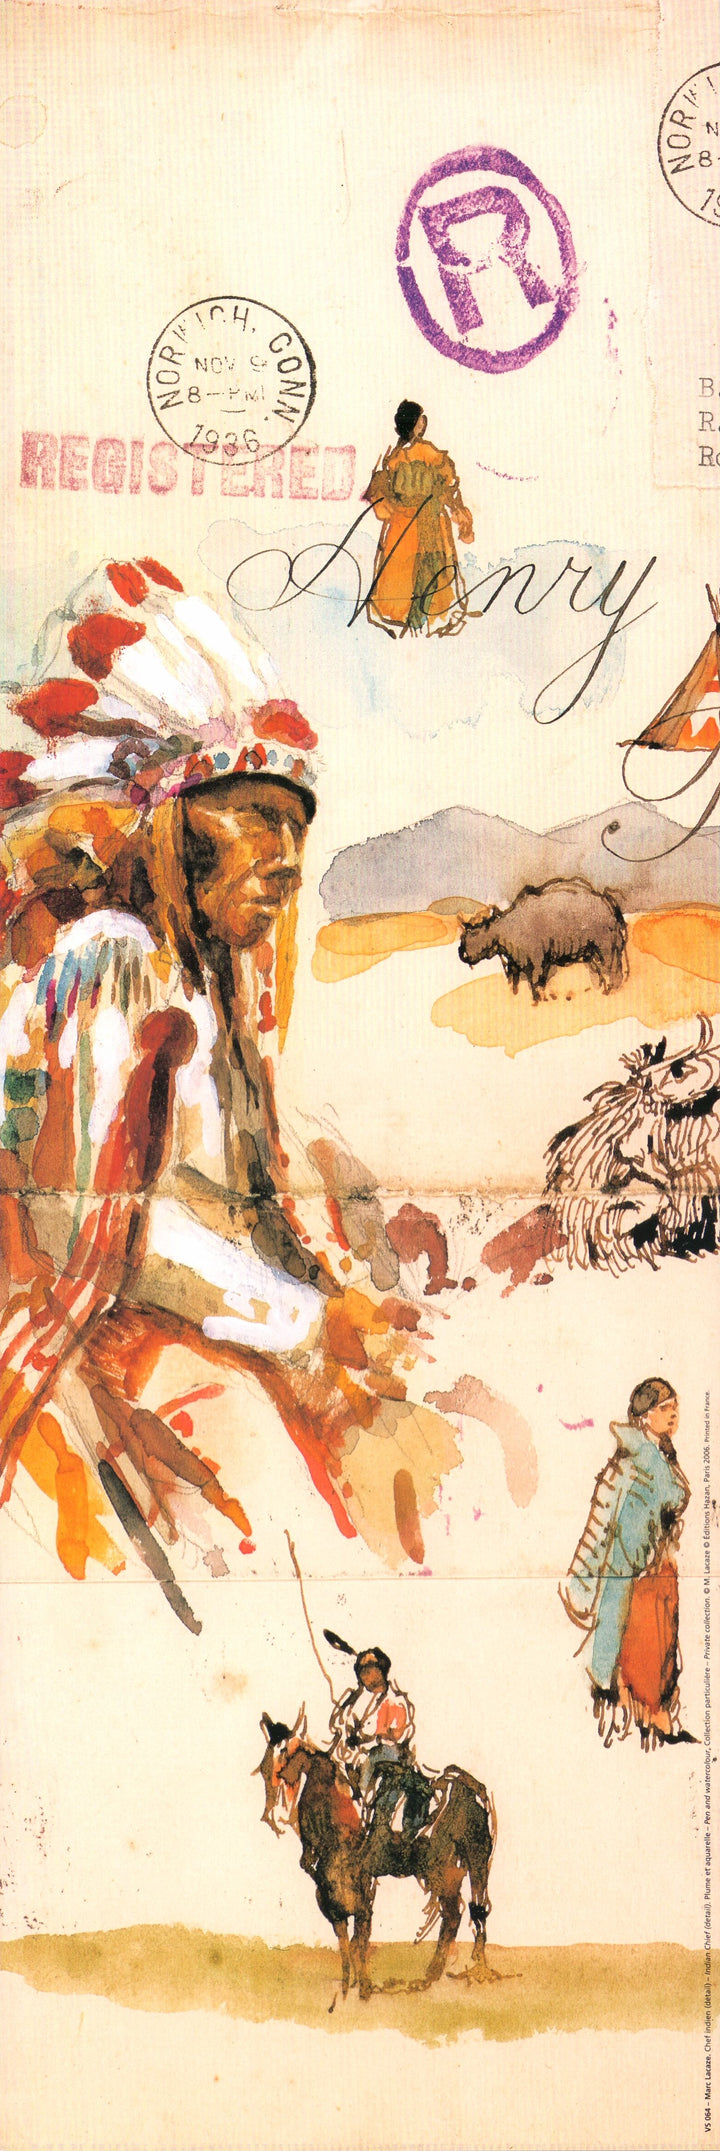 Indian Chief (detail) by Marc Lacaze - 8 X 24 Inches (Art Print)